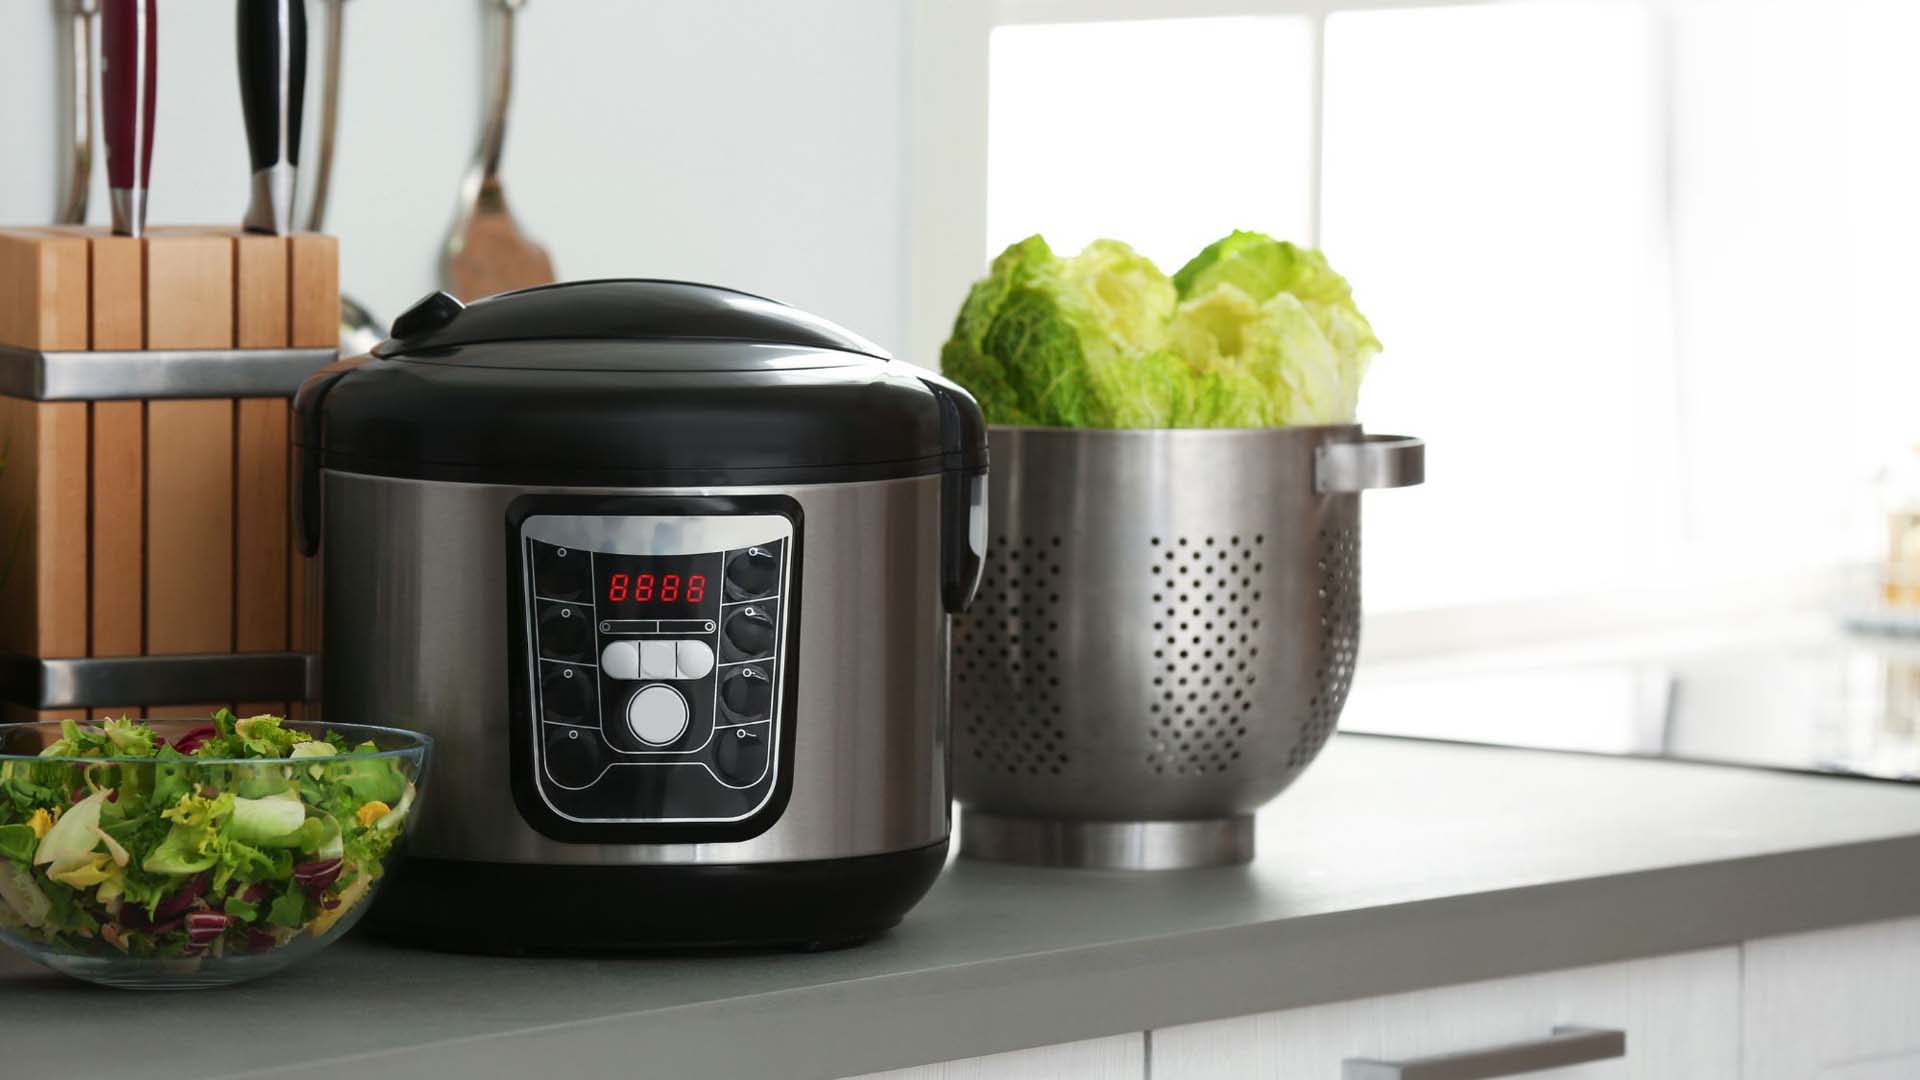 A pressure ccooker on a kitchen counter next to some vegetables